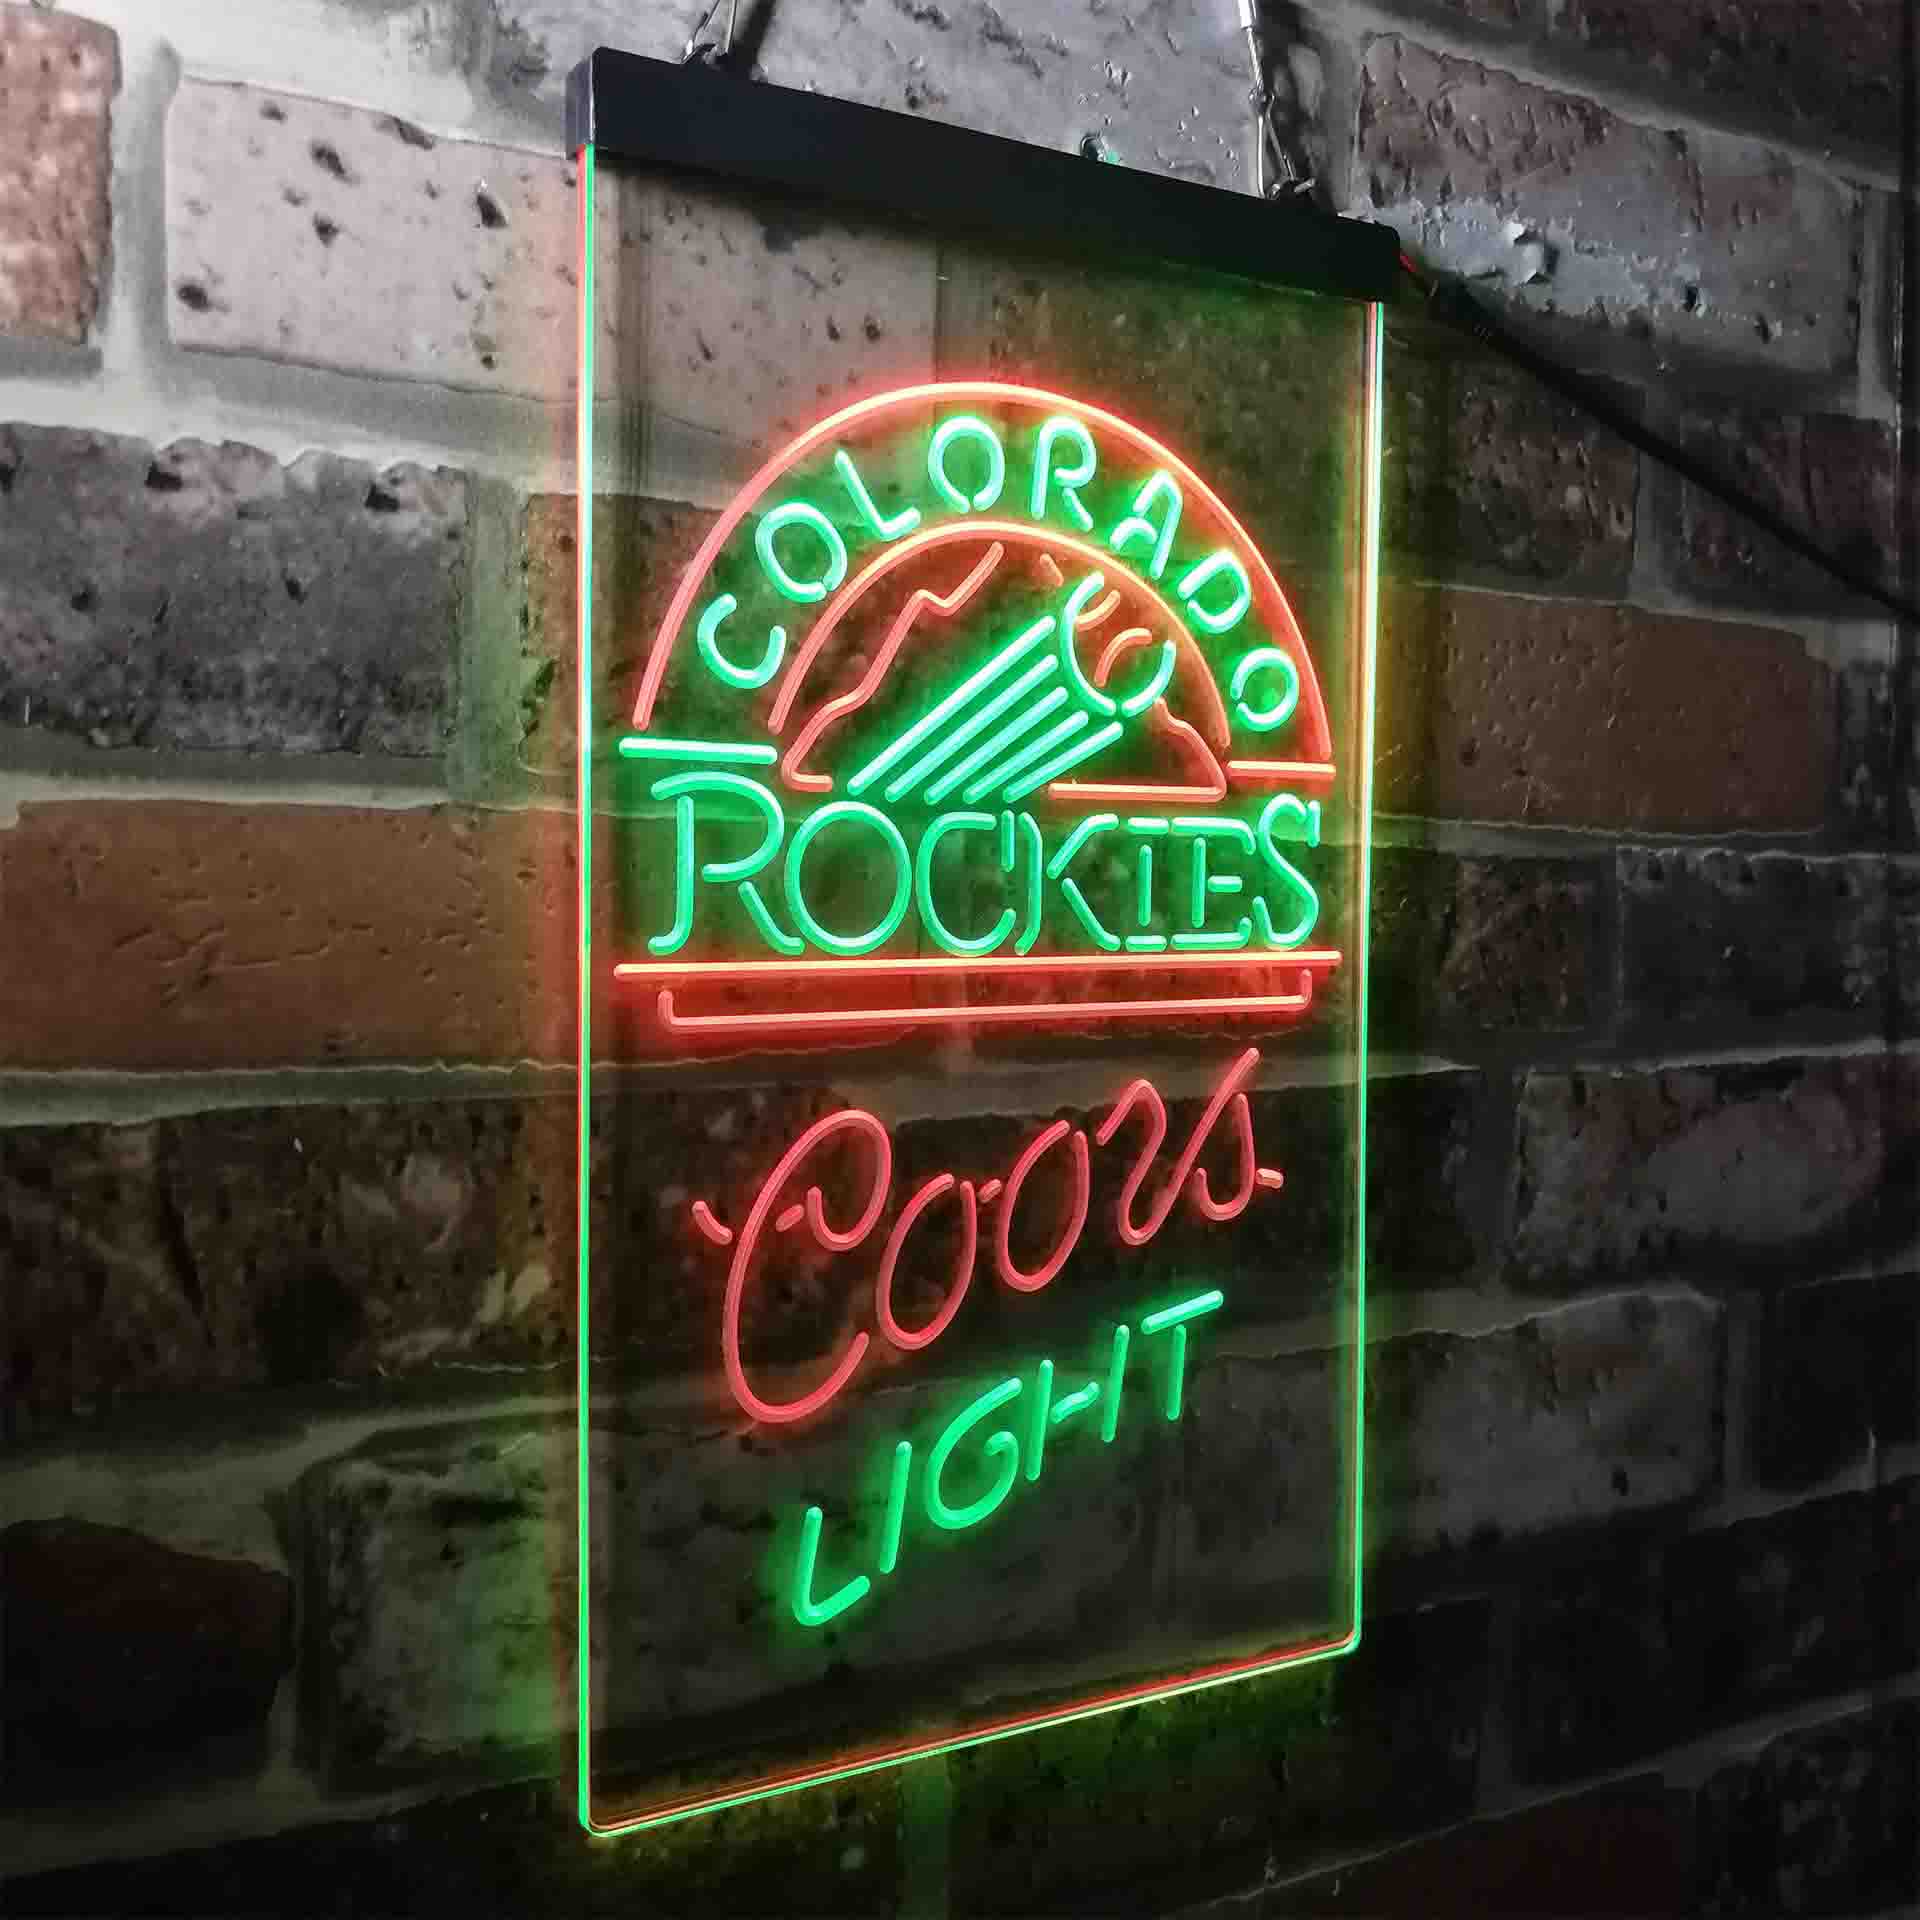 Colorado Rockies Coors Light LED Neon Sign